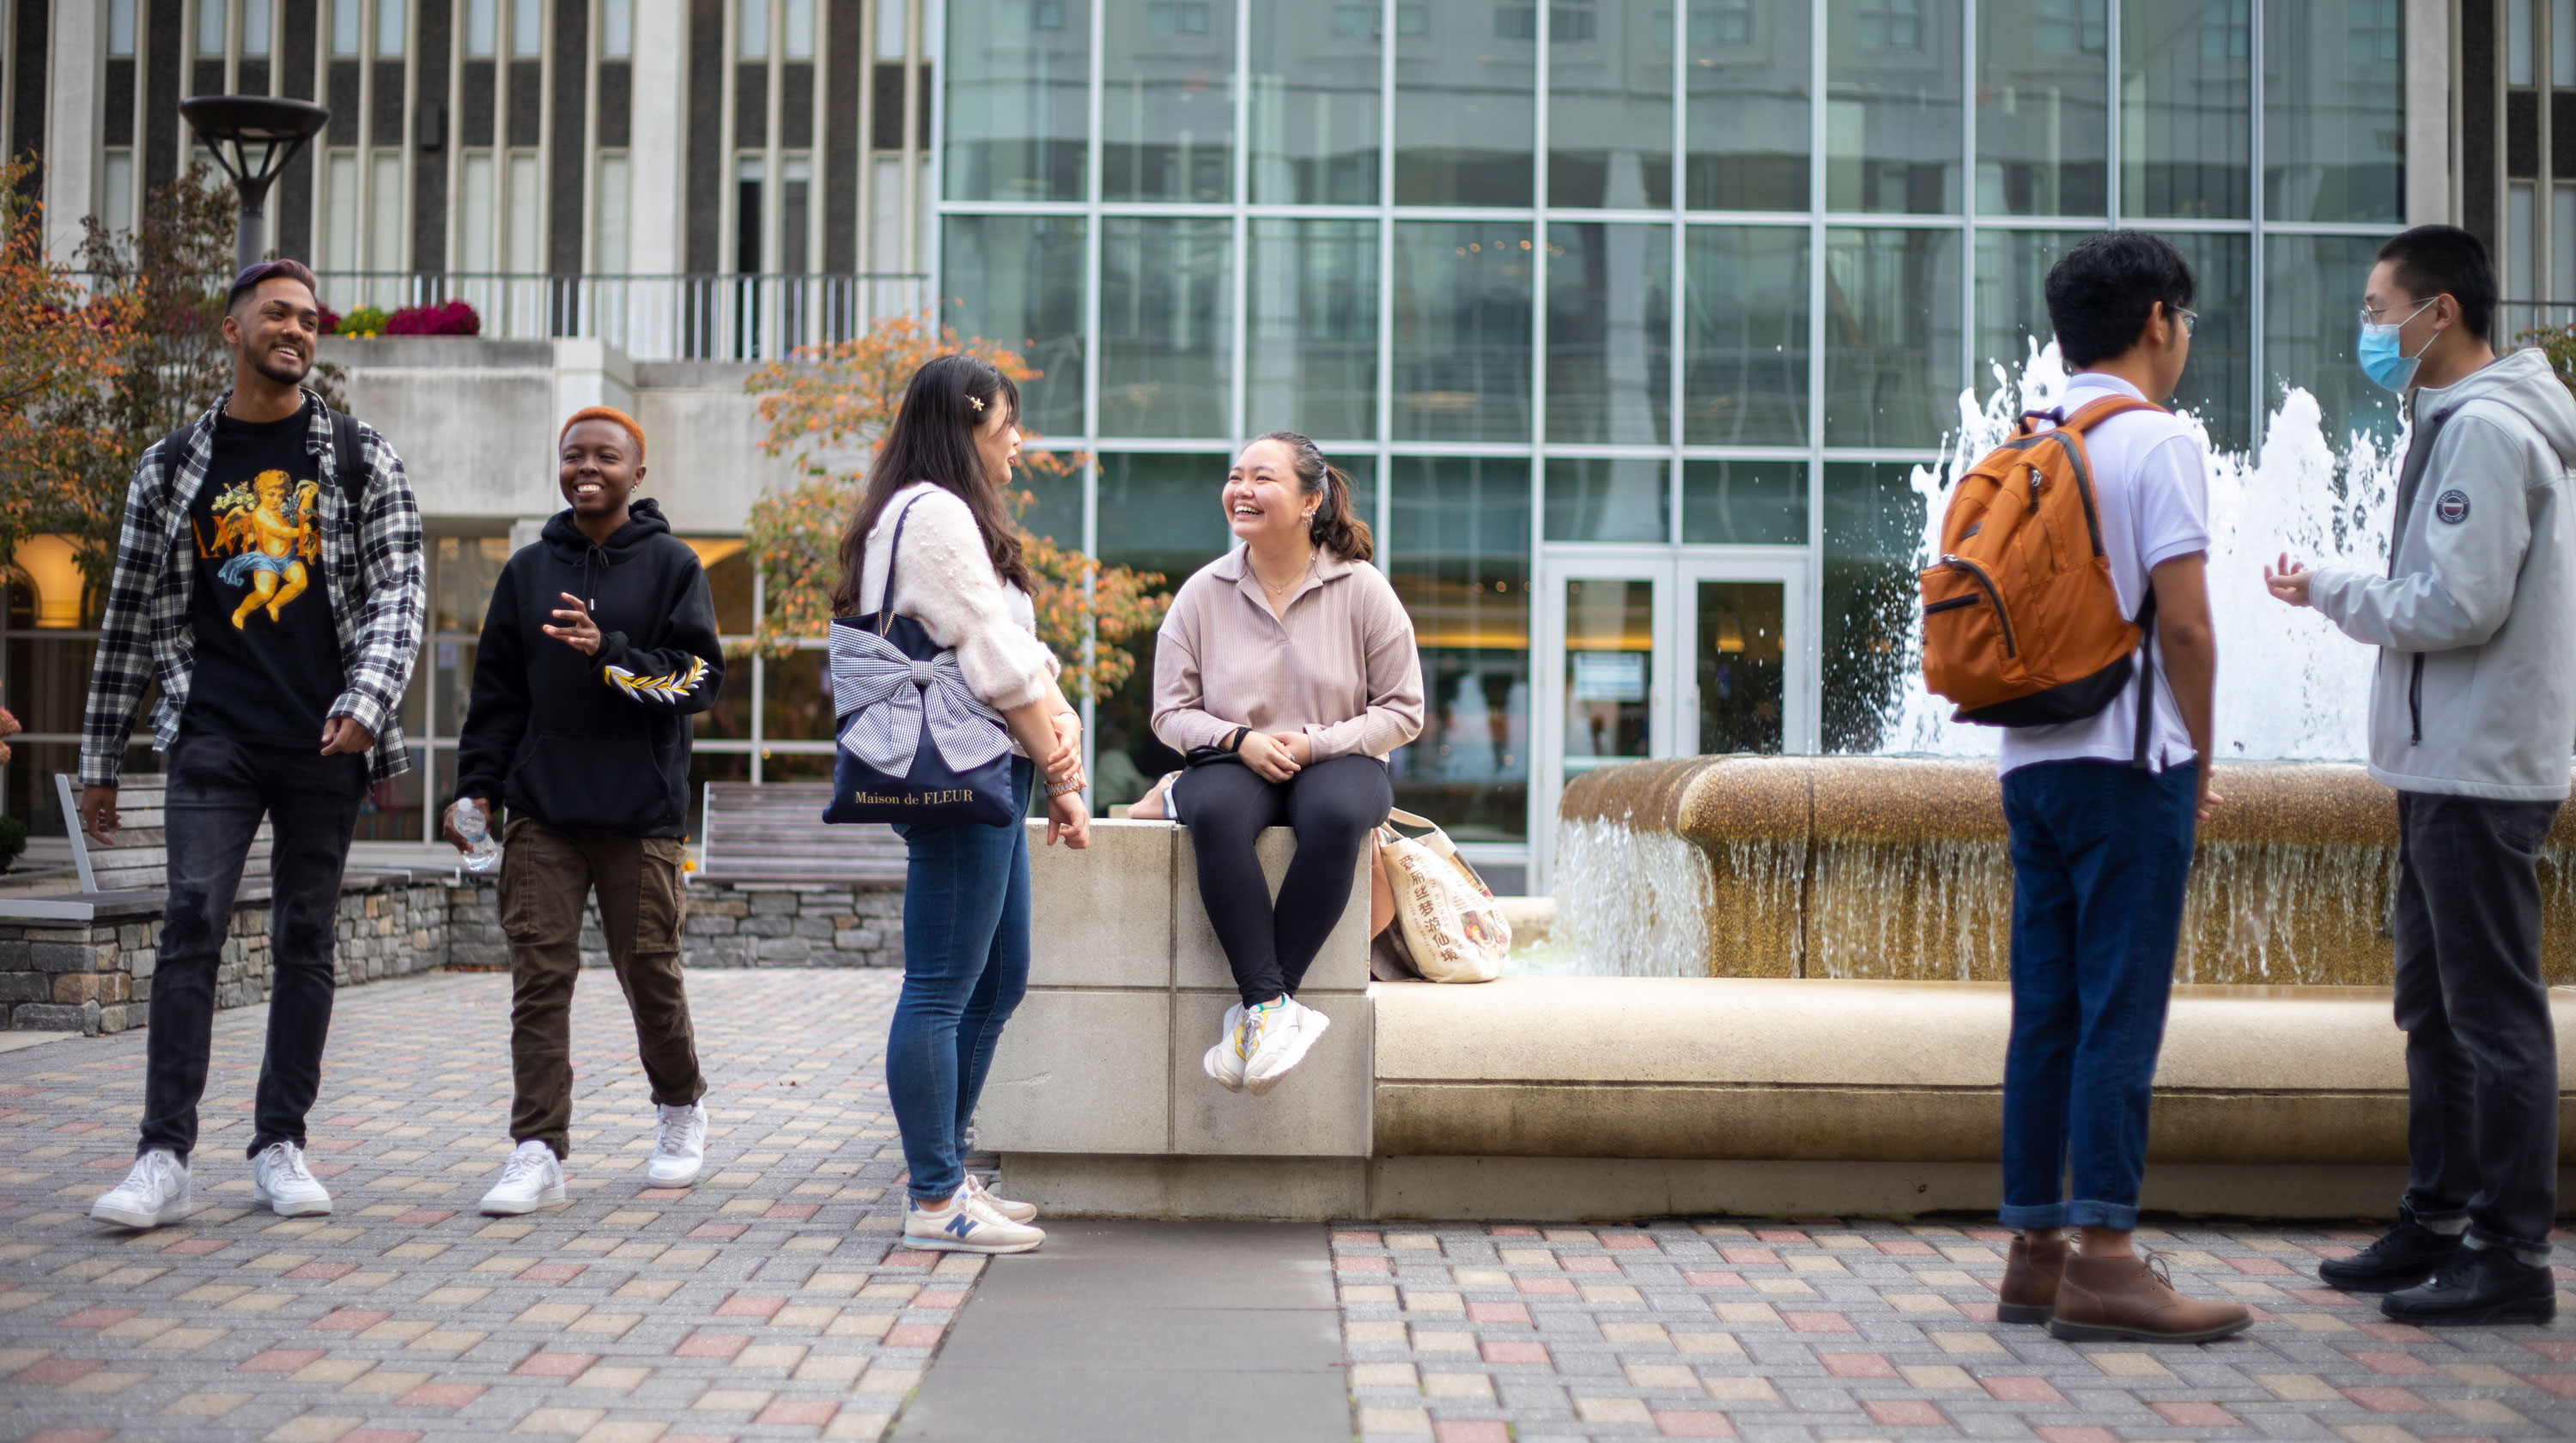 Six students gather outside on campus, speaking and smiling in pairs. Two are walking, three are standing and one is sitting.